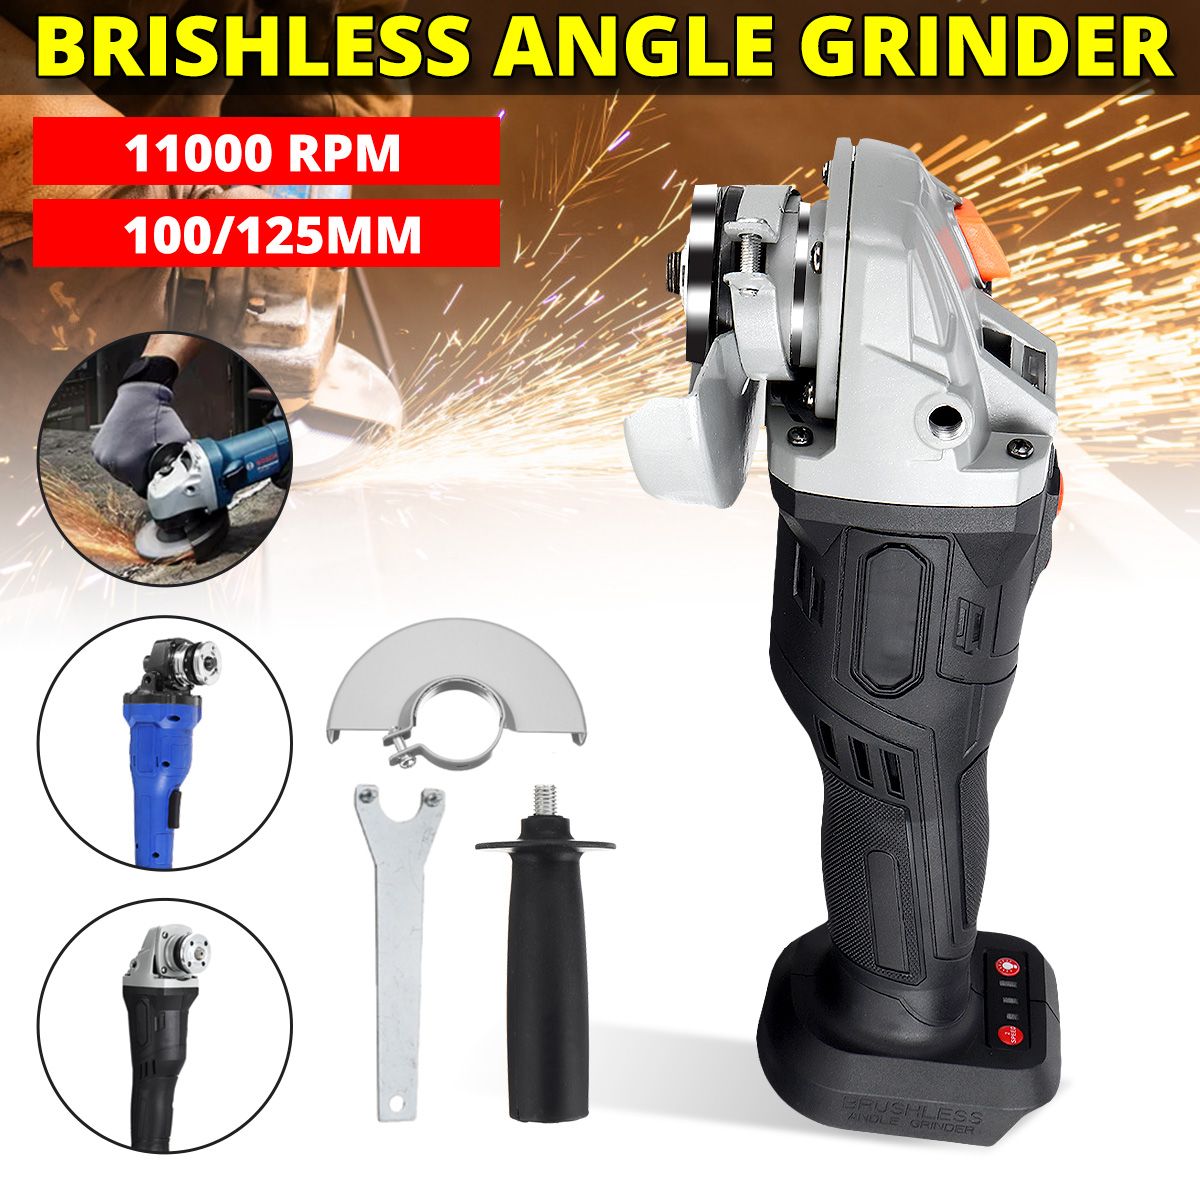 100125MM-Display-800W-Electric-Angle-Grinder-Rech-argeable-Polishing-Cutting-Machine-Hand-Grinder-To-1683204